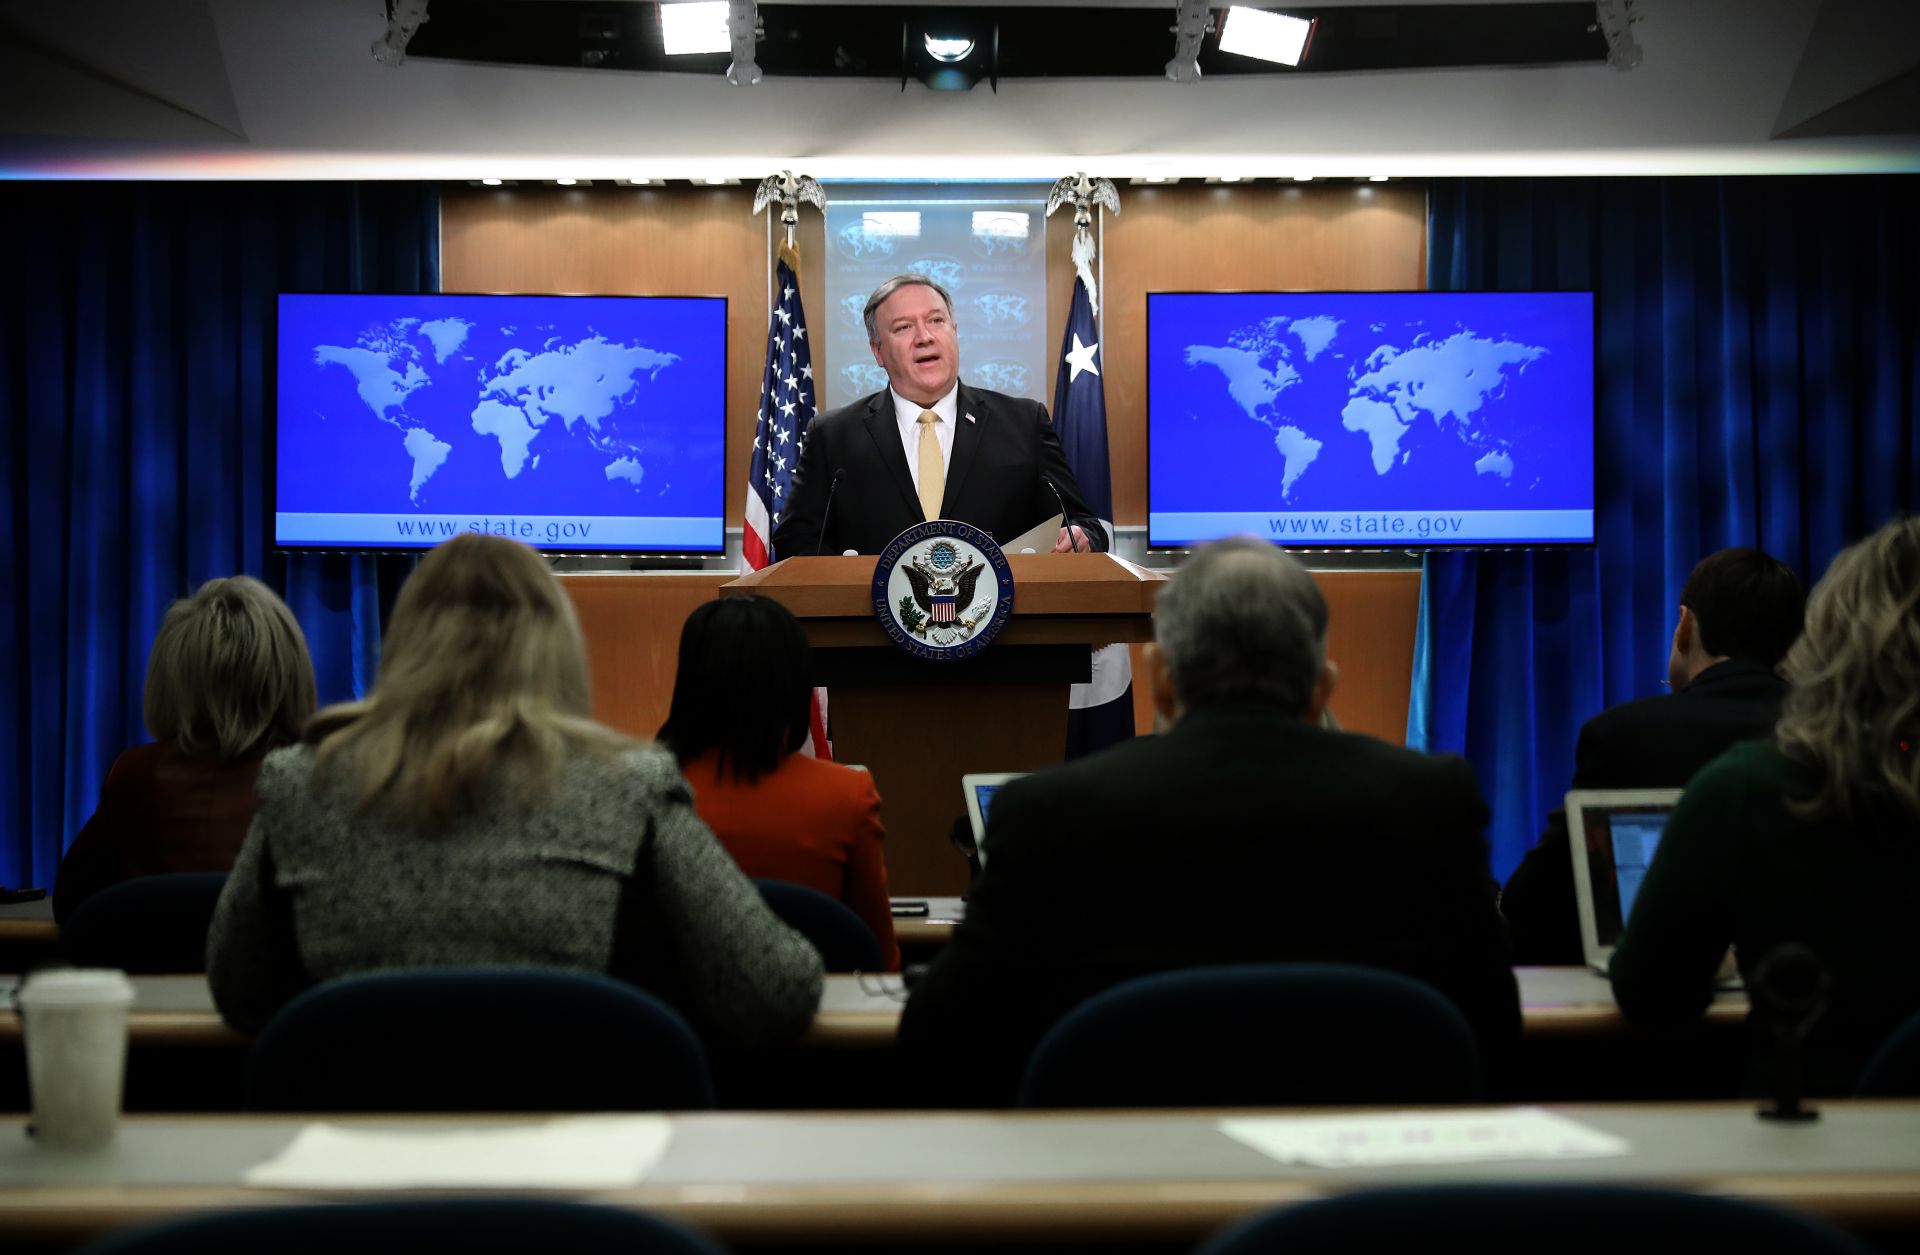 Secretary of State Mike Pompeo announces that the United States is suspending its participation in the Intermediate-Range Nuclear Forces Treaty on Feb. 1, 2019.